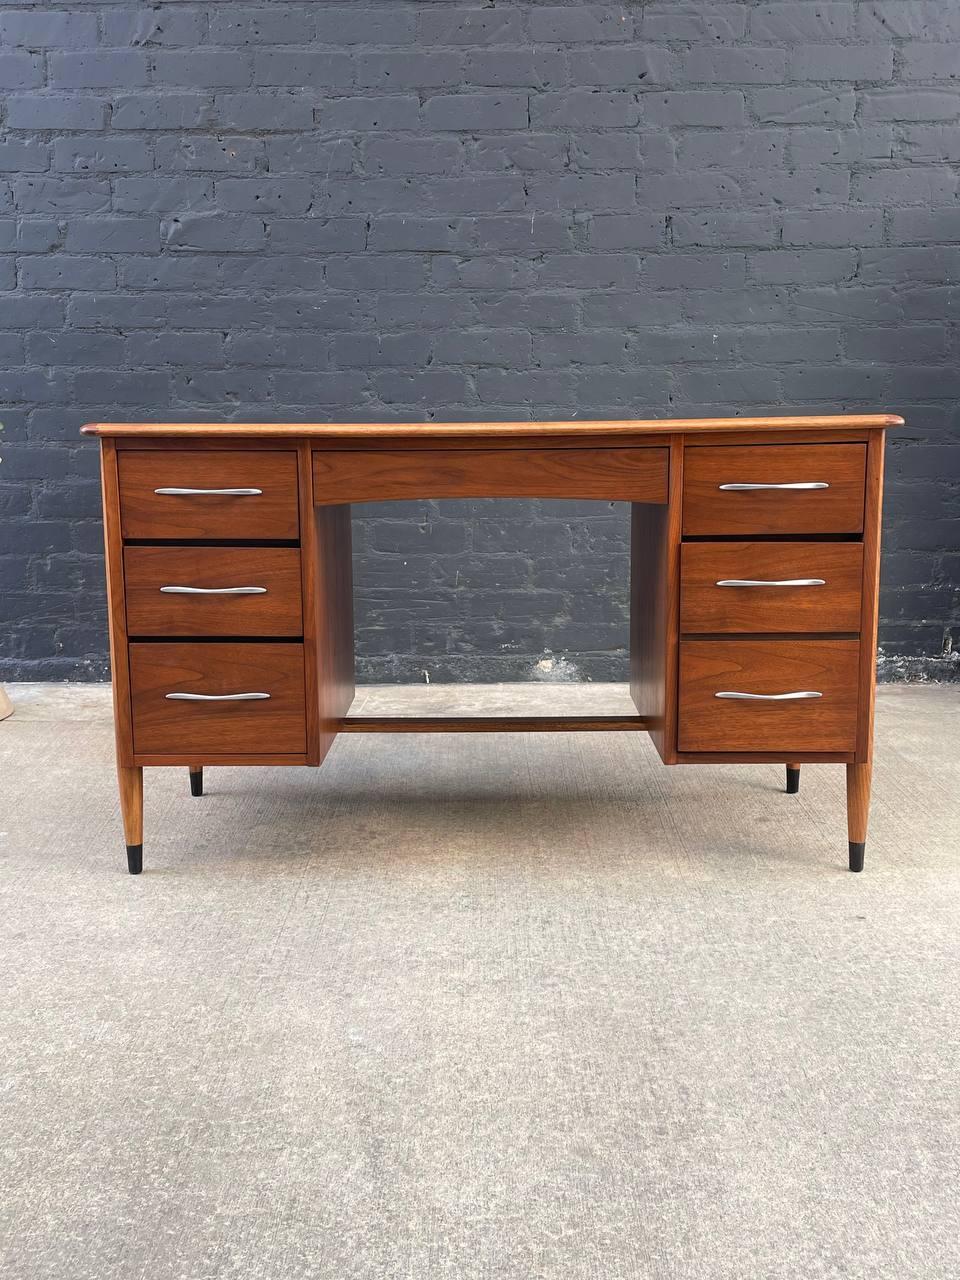 Mid-20th Century Newly Refinished - Mid-Century Modern “Acclaim” Desk by Lane